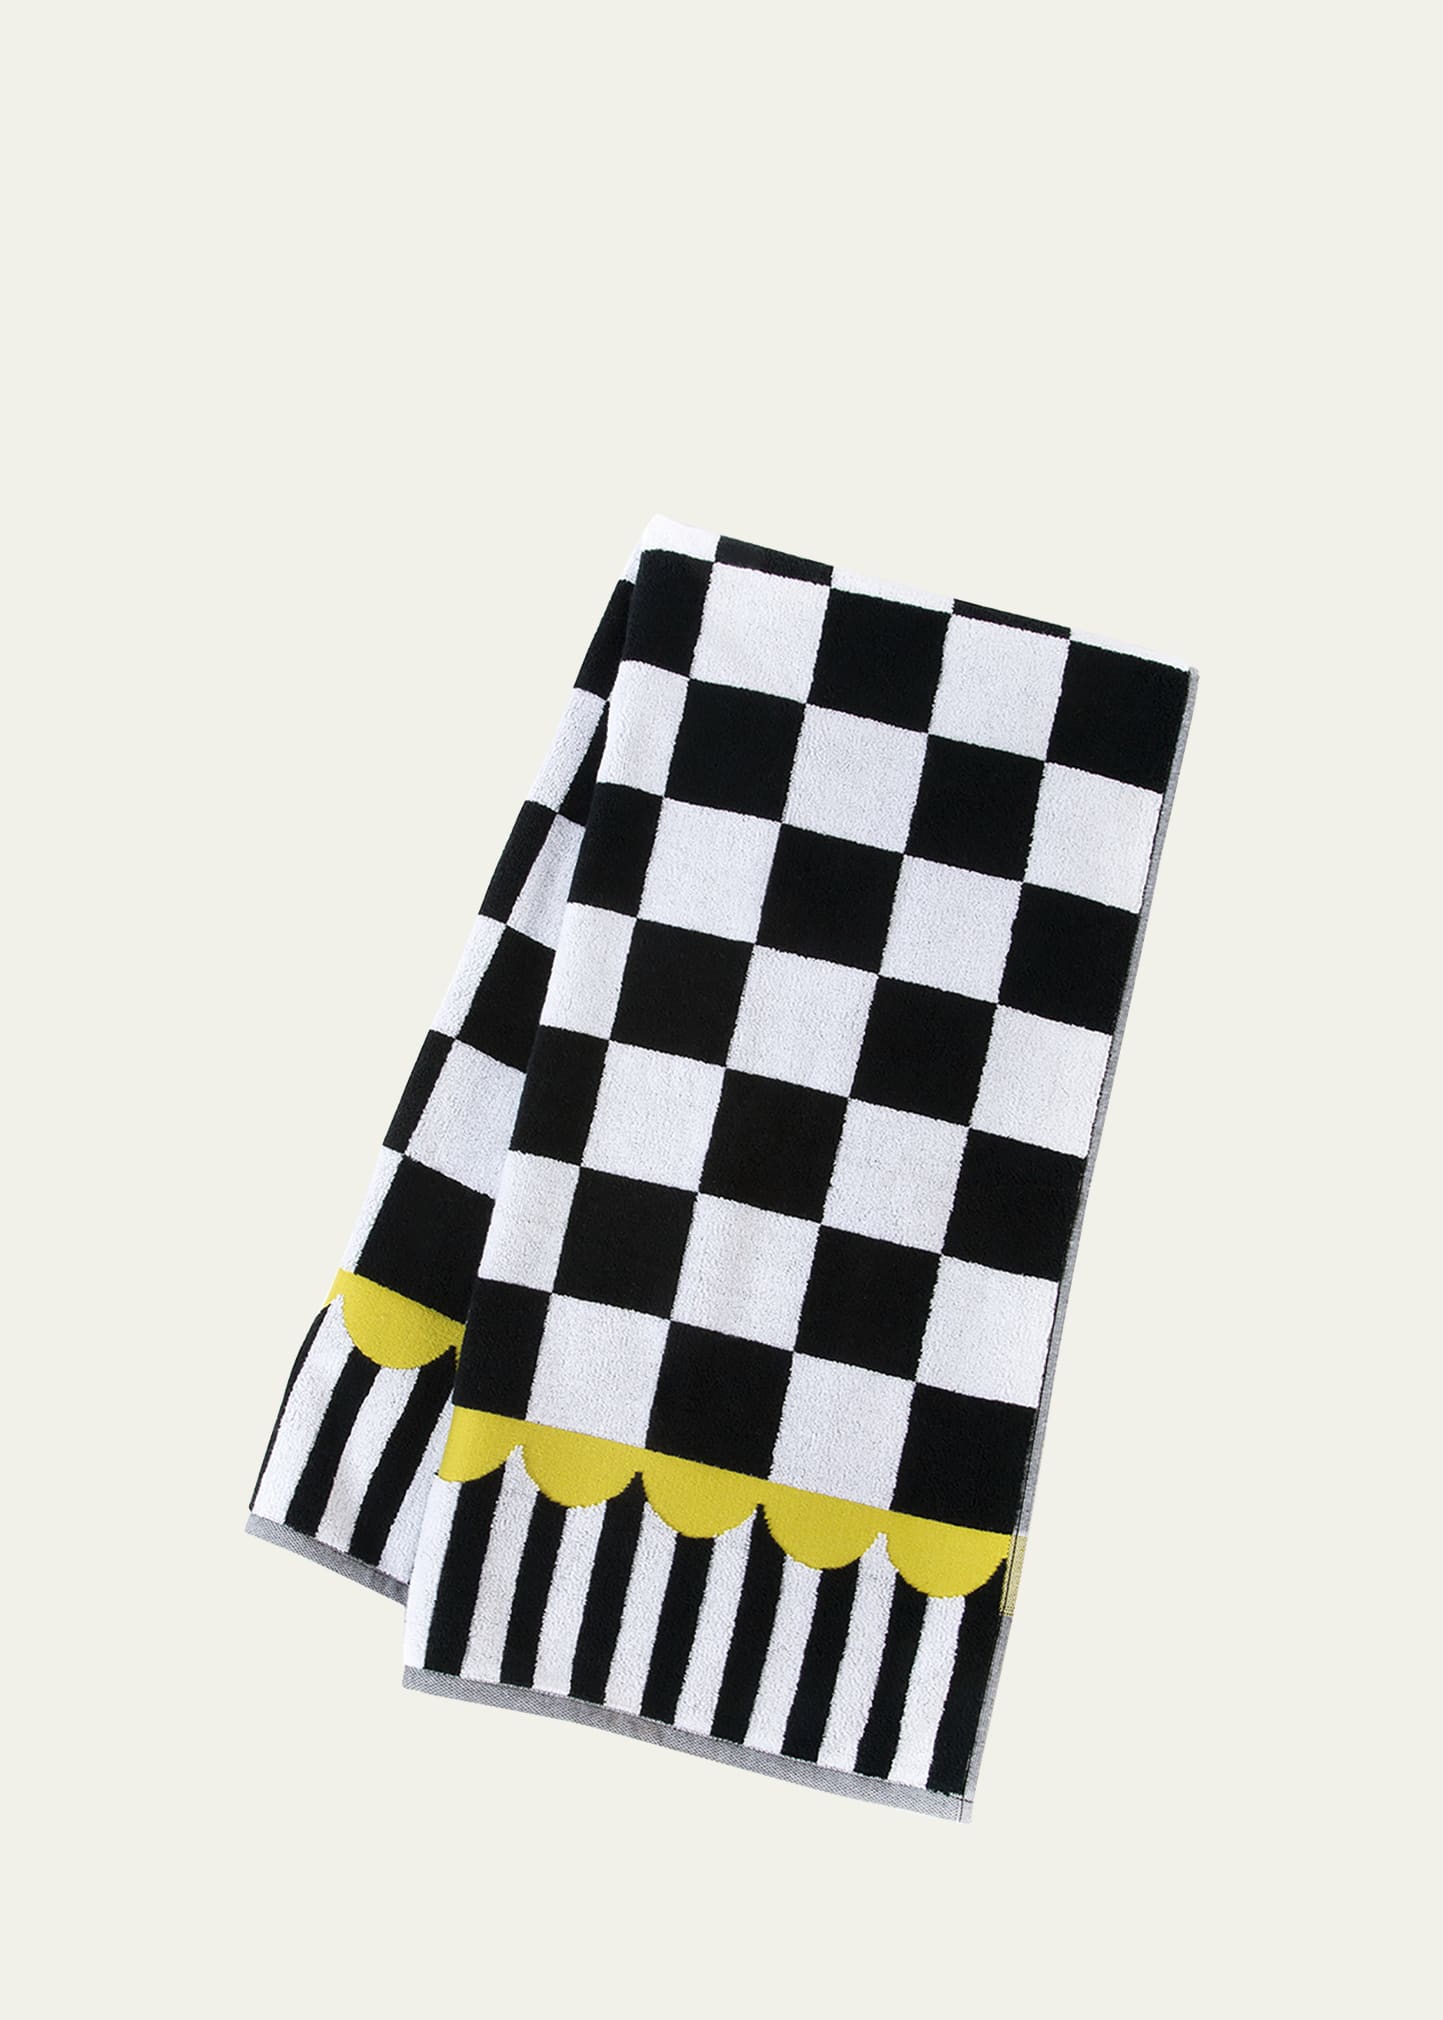 Courtly Check Bath Towel